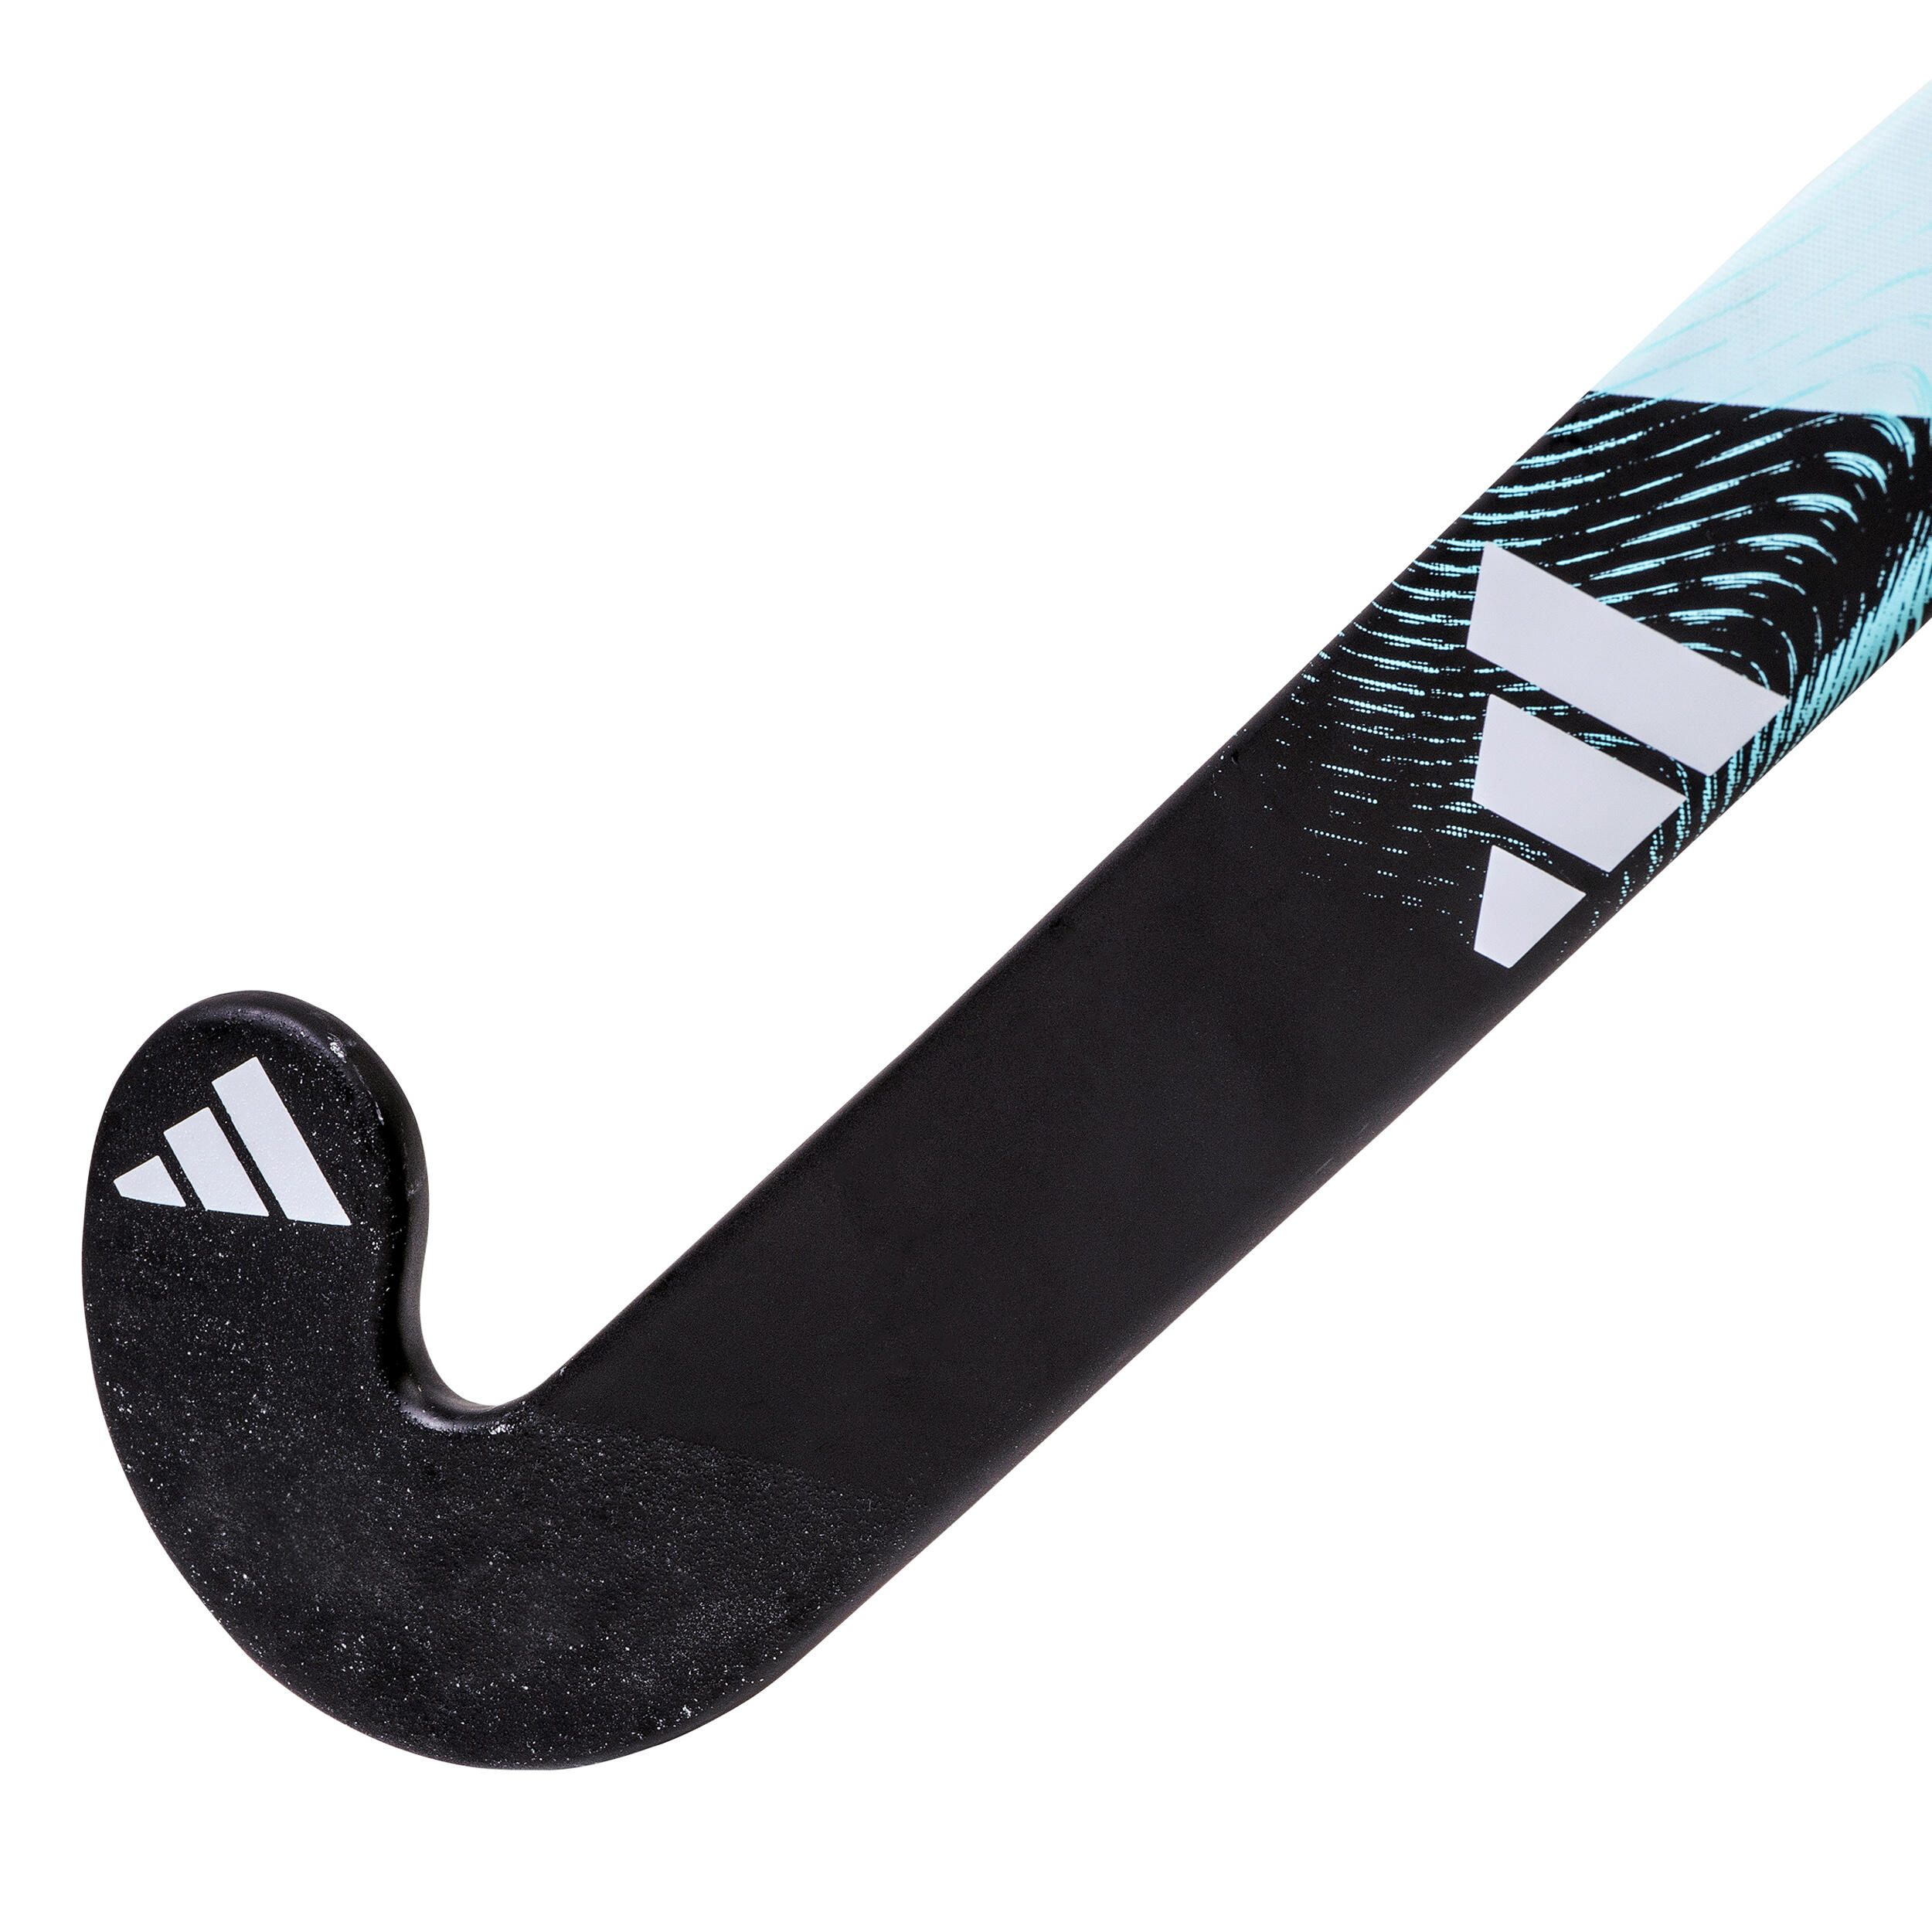 Adult Intermediate 20% Carbon Mid Bow Field Hockey Stick Fabela .7 - Black/Turquoise 2/12